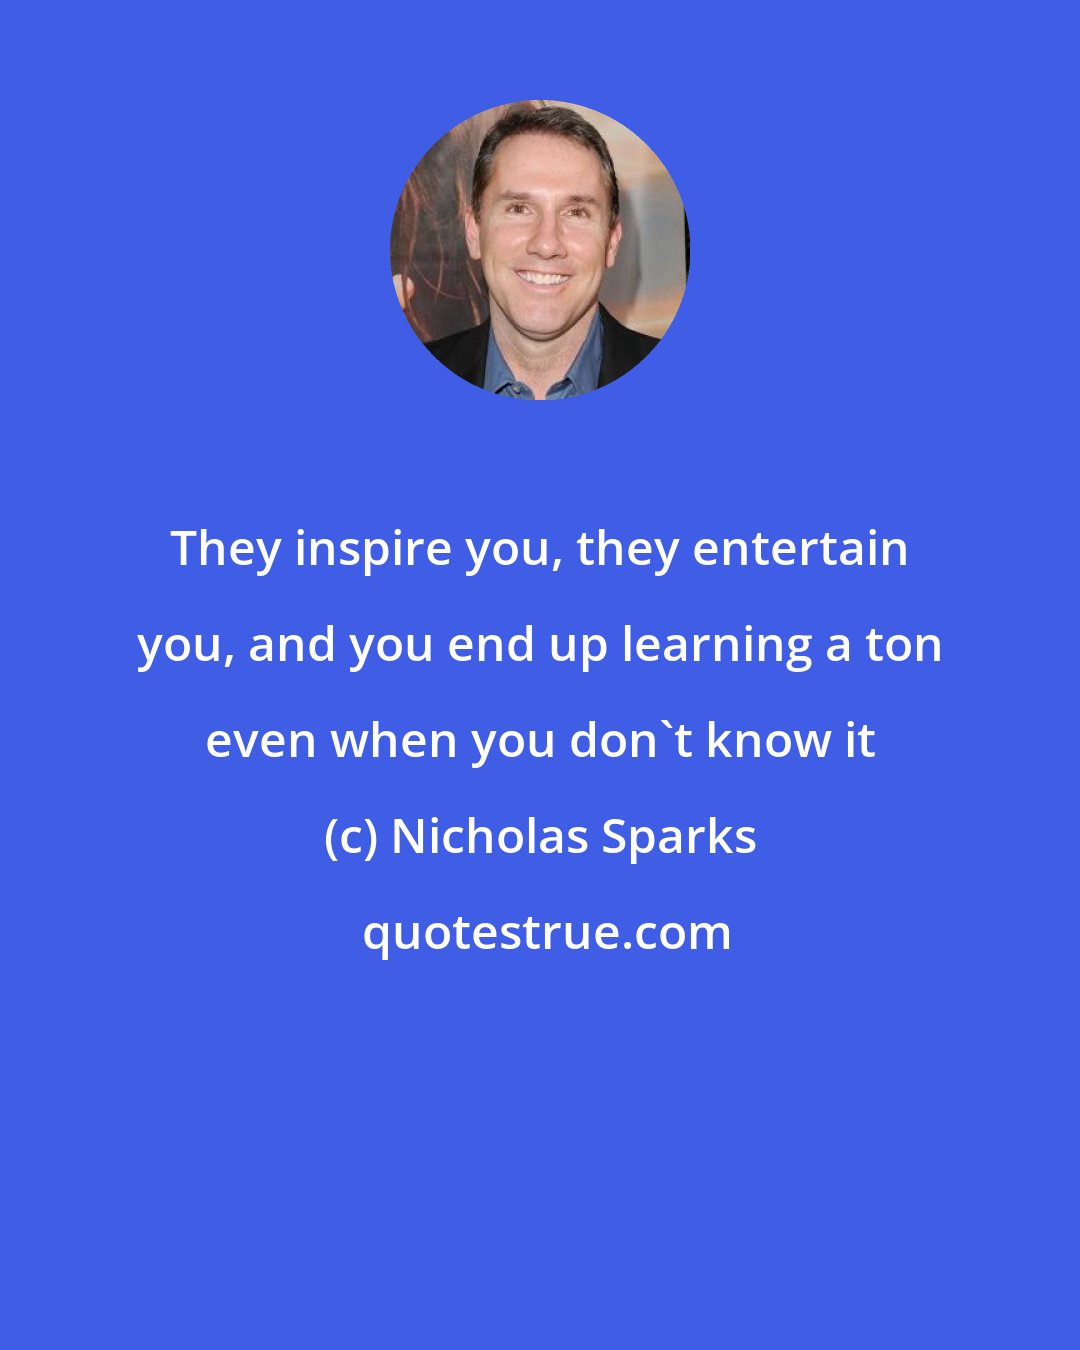 Nicholas Sparks: They inspire you, they entertain you, and you end up learning a ton even when you don't know it